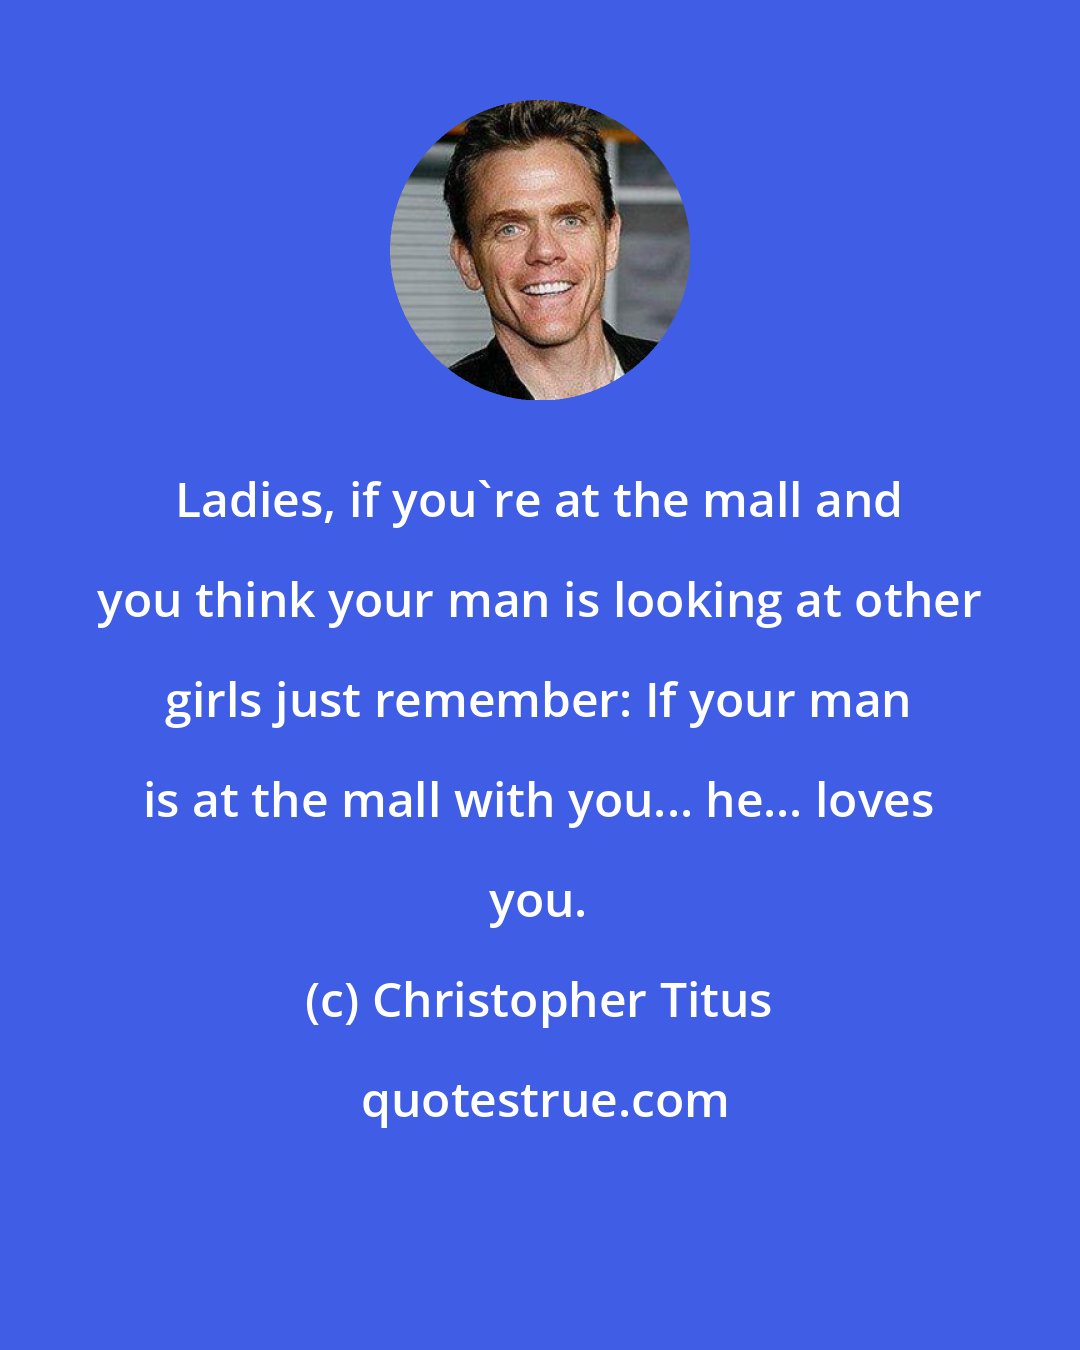 Christopher Titus: Ladies, if you're at the mall and you think your man is looking at other girls just remember: If your man is at the mall with you... he... loves you.